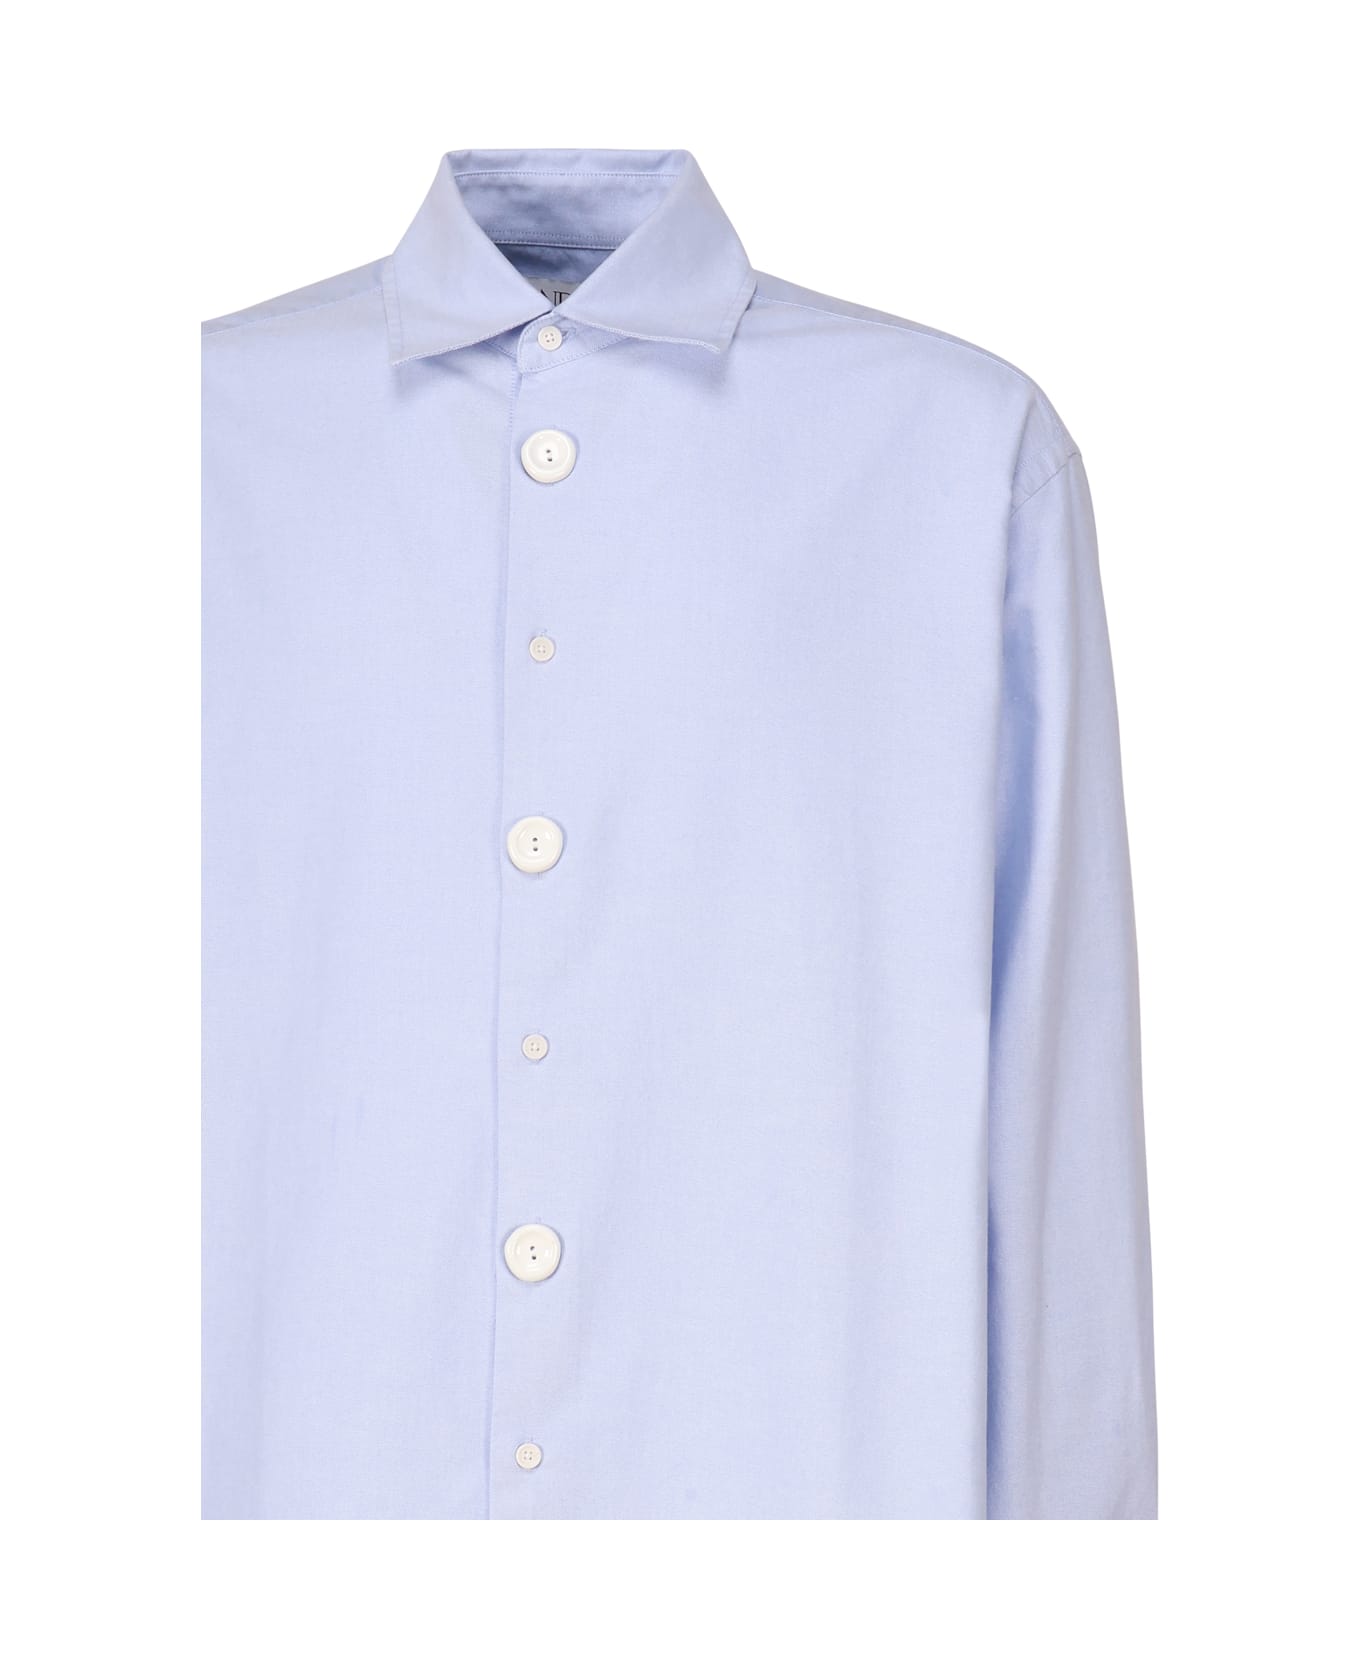 J.W. Anderson Shirt With Anchor Embroidery - Light blue